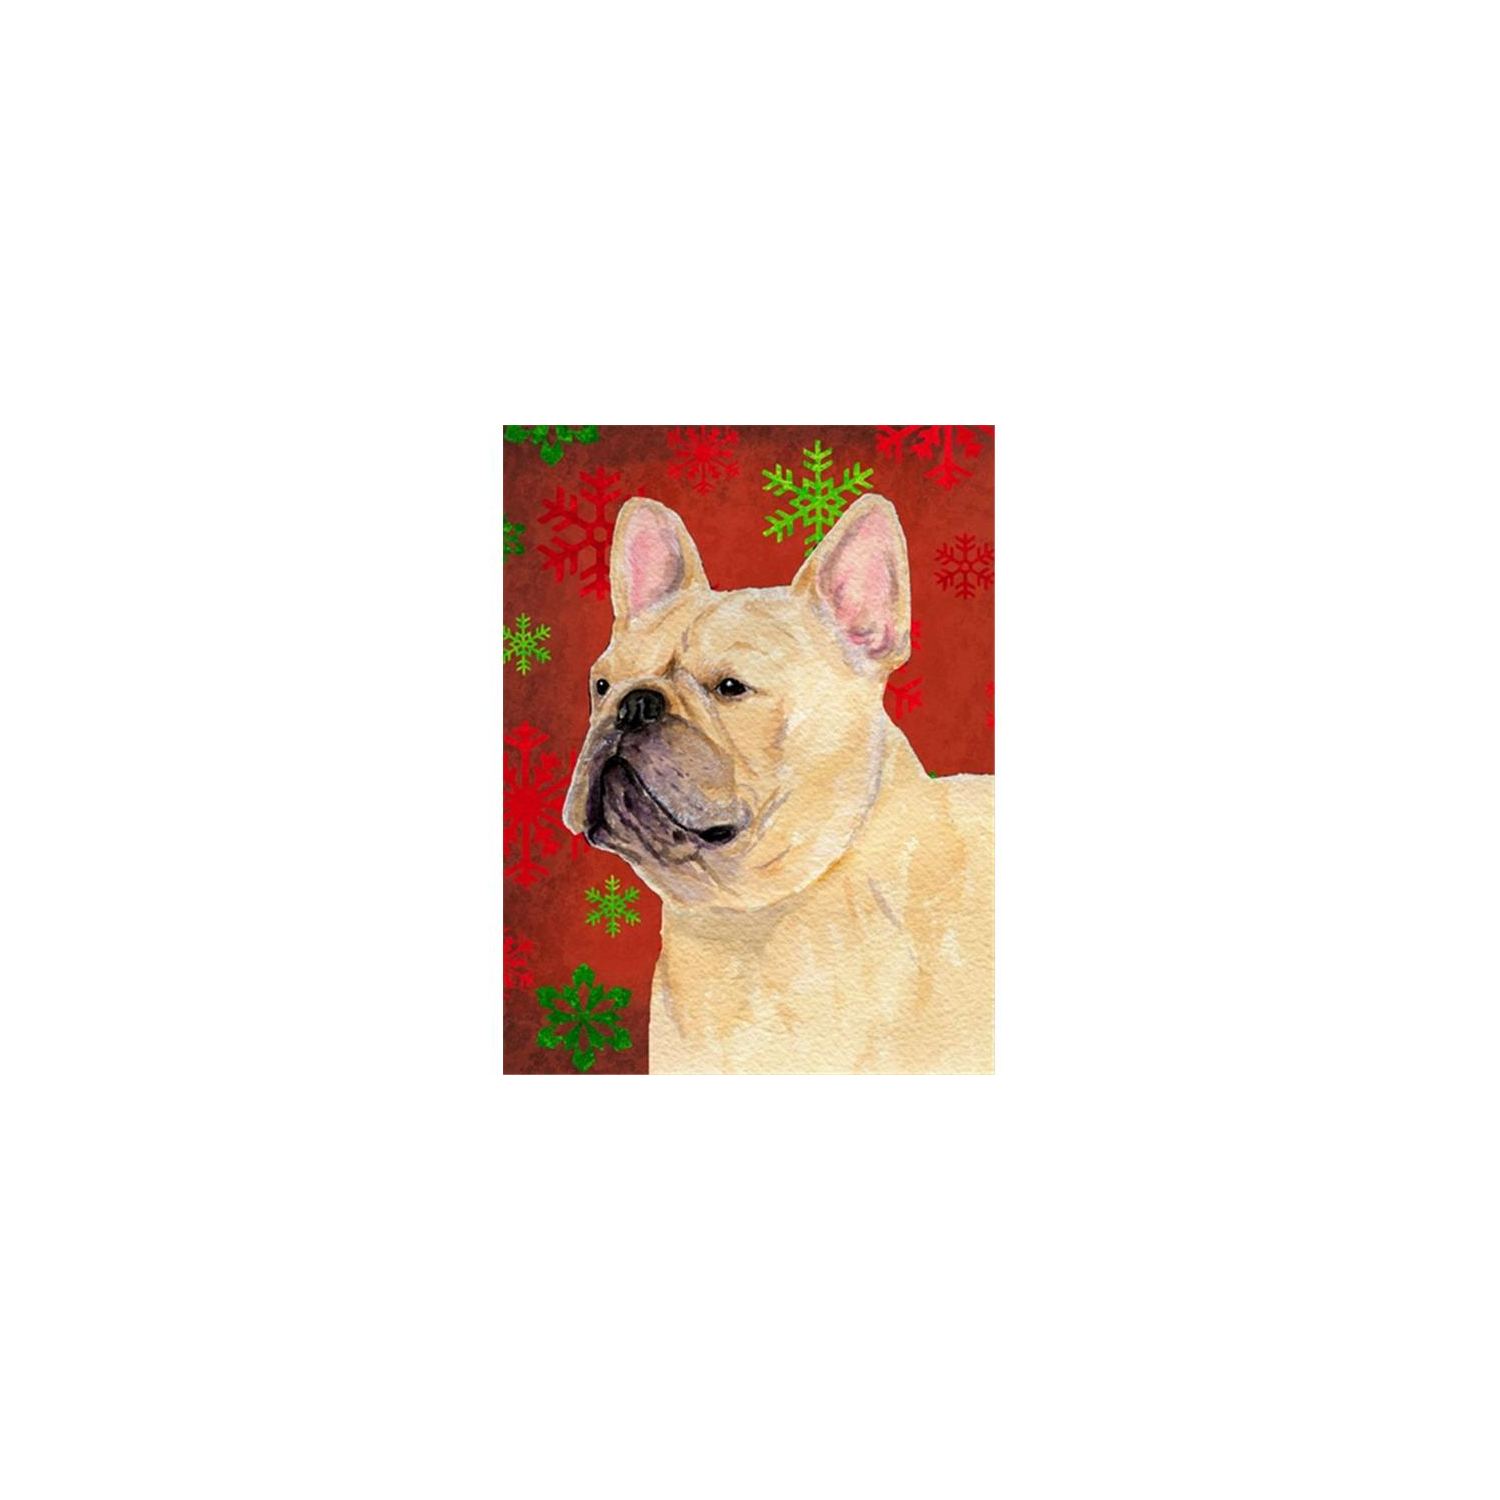 Carolines Treasures SS4692GF 11 x 15 in. French Bulldog Red And Green Snowflakes Holiday Christmas Flag Garden Size